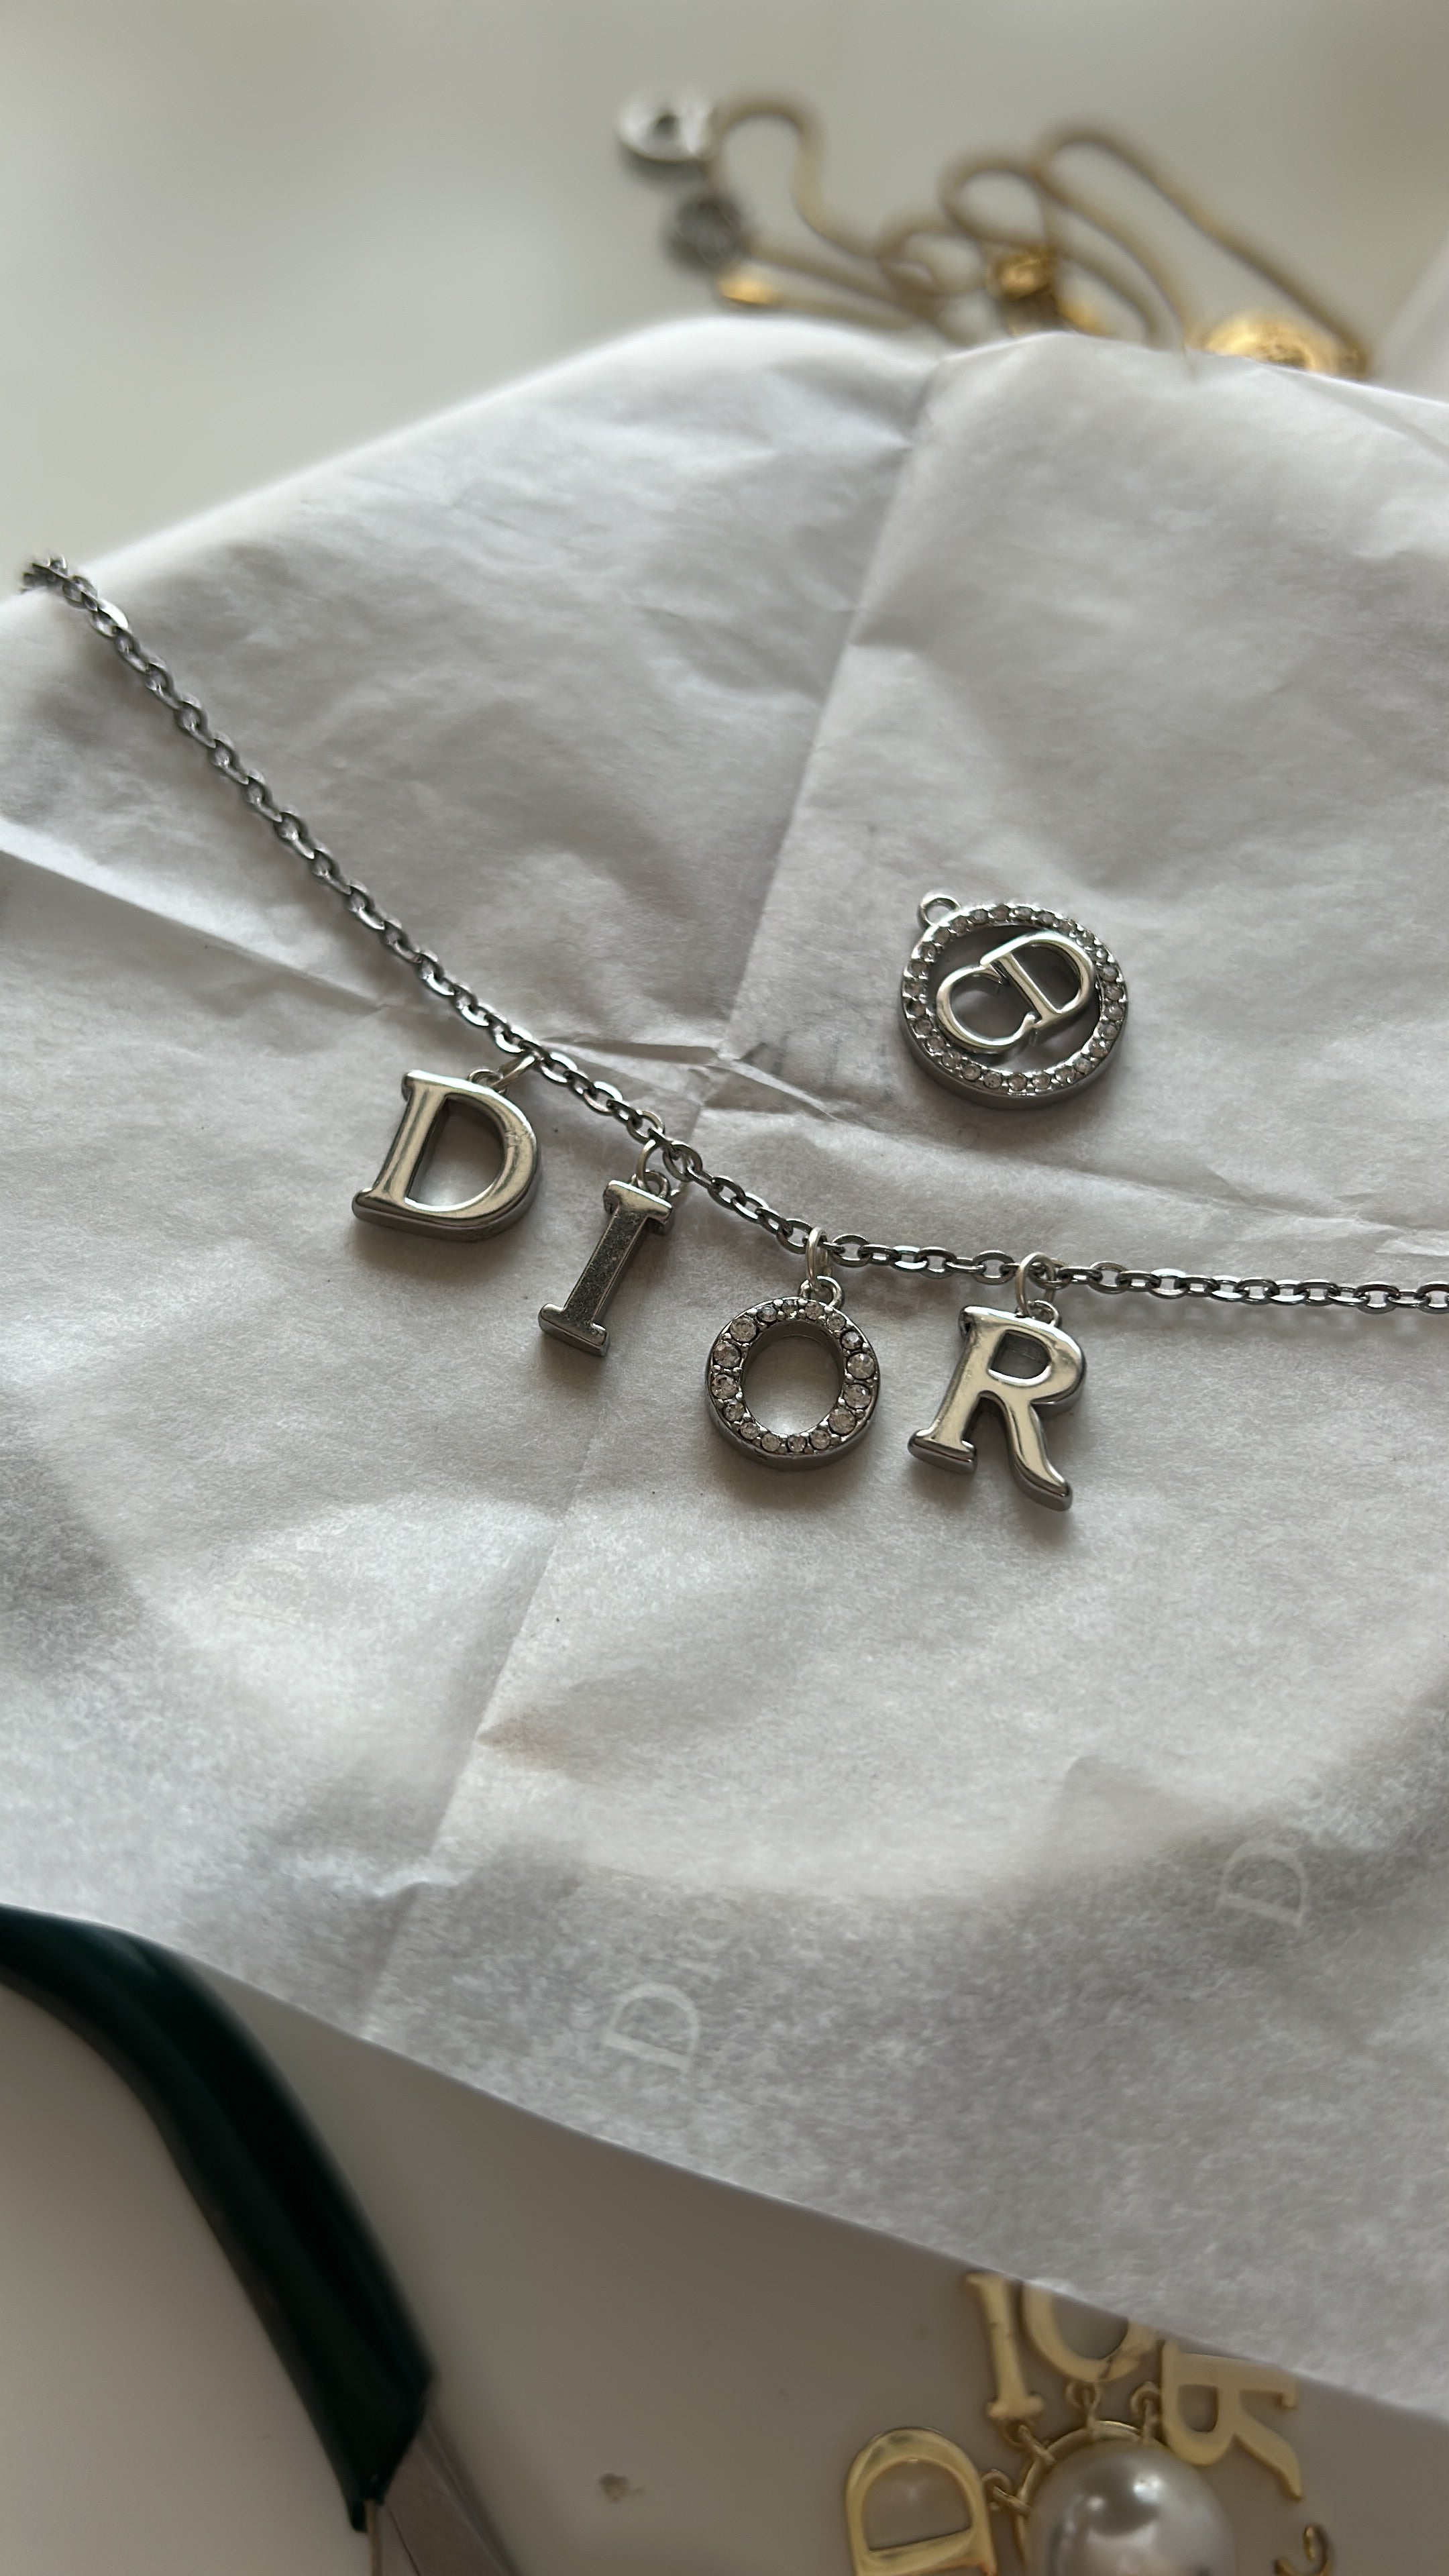 Christian Dior Trotter Tag Necklace